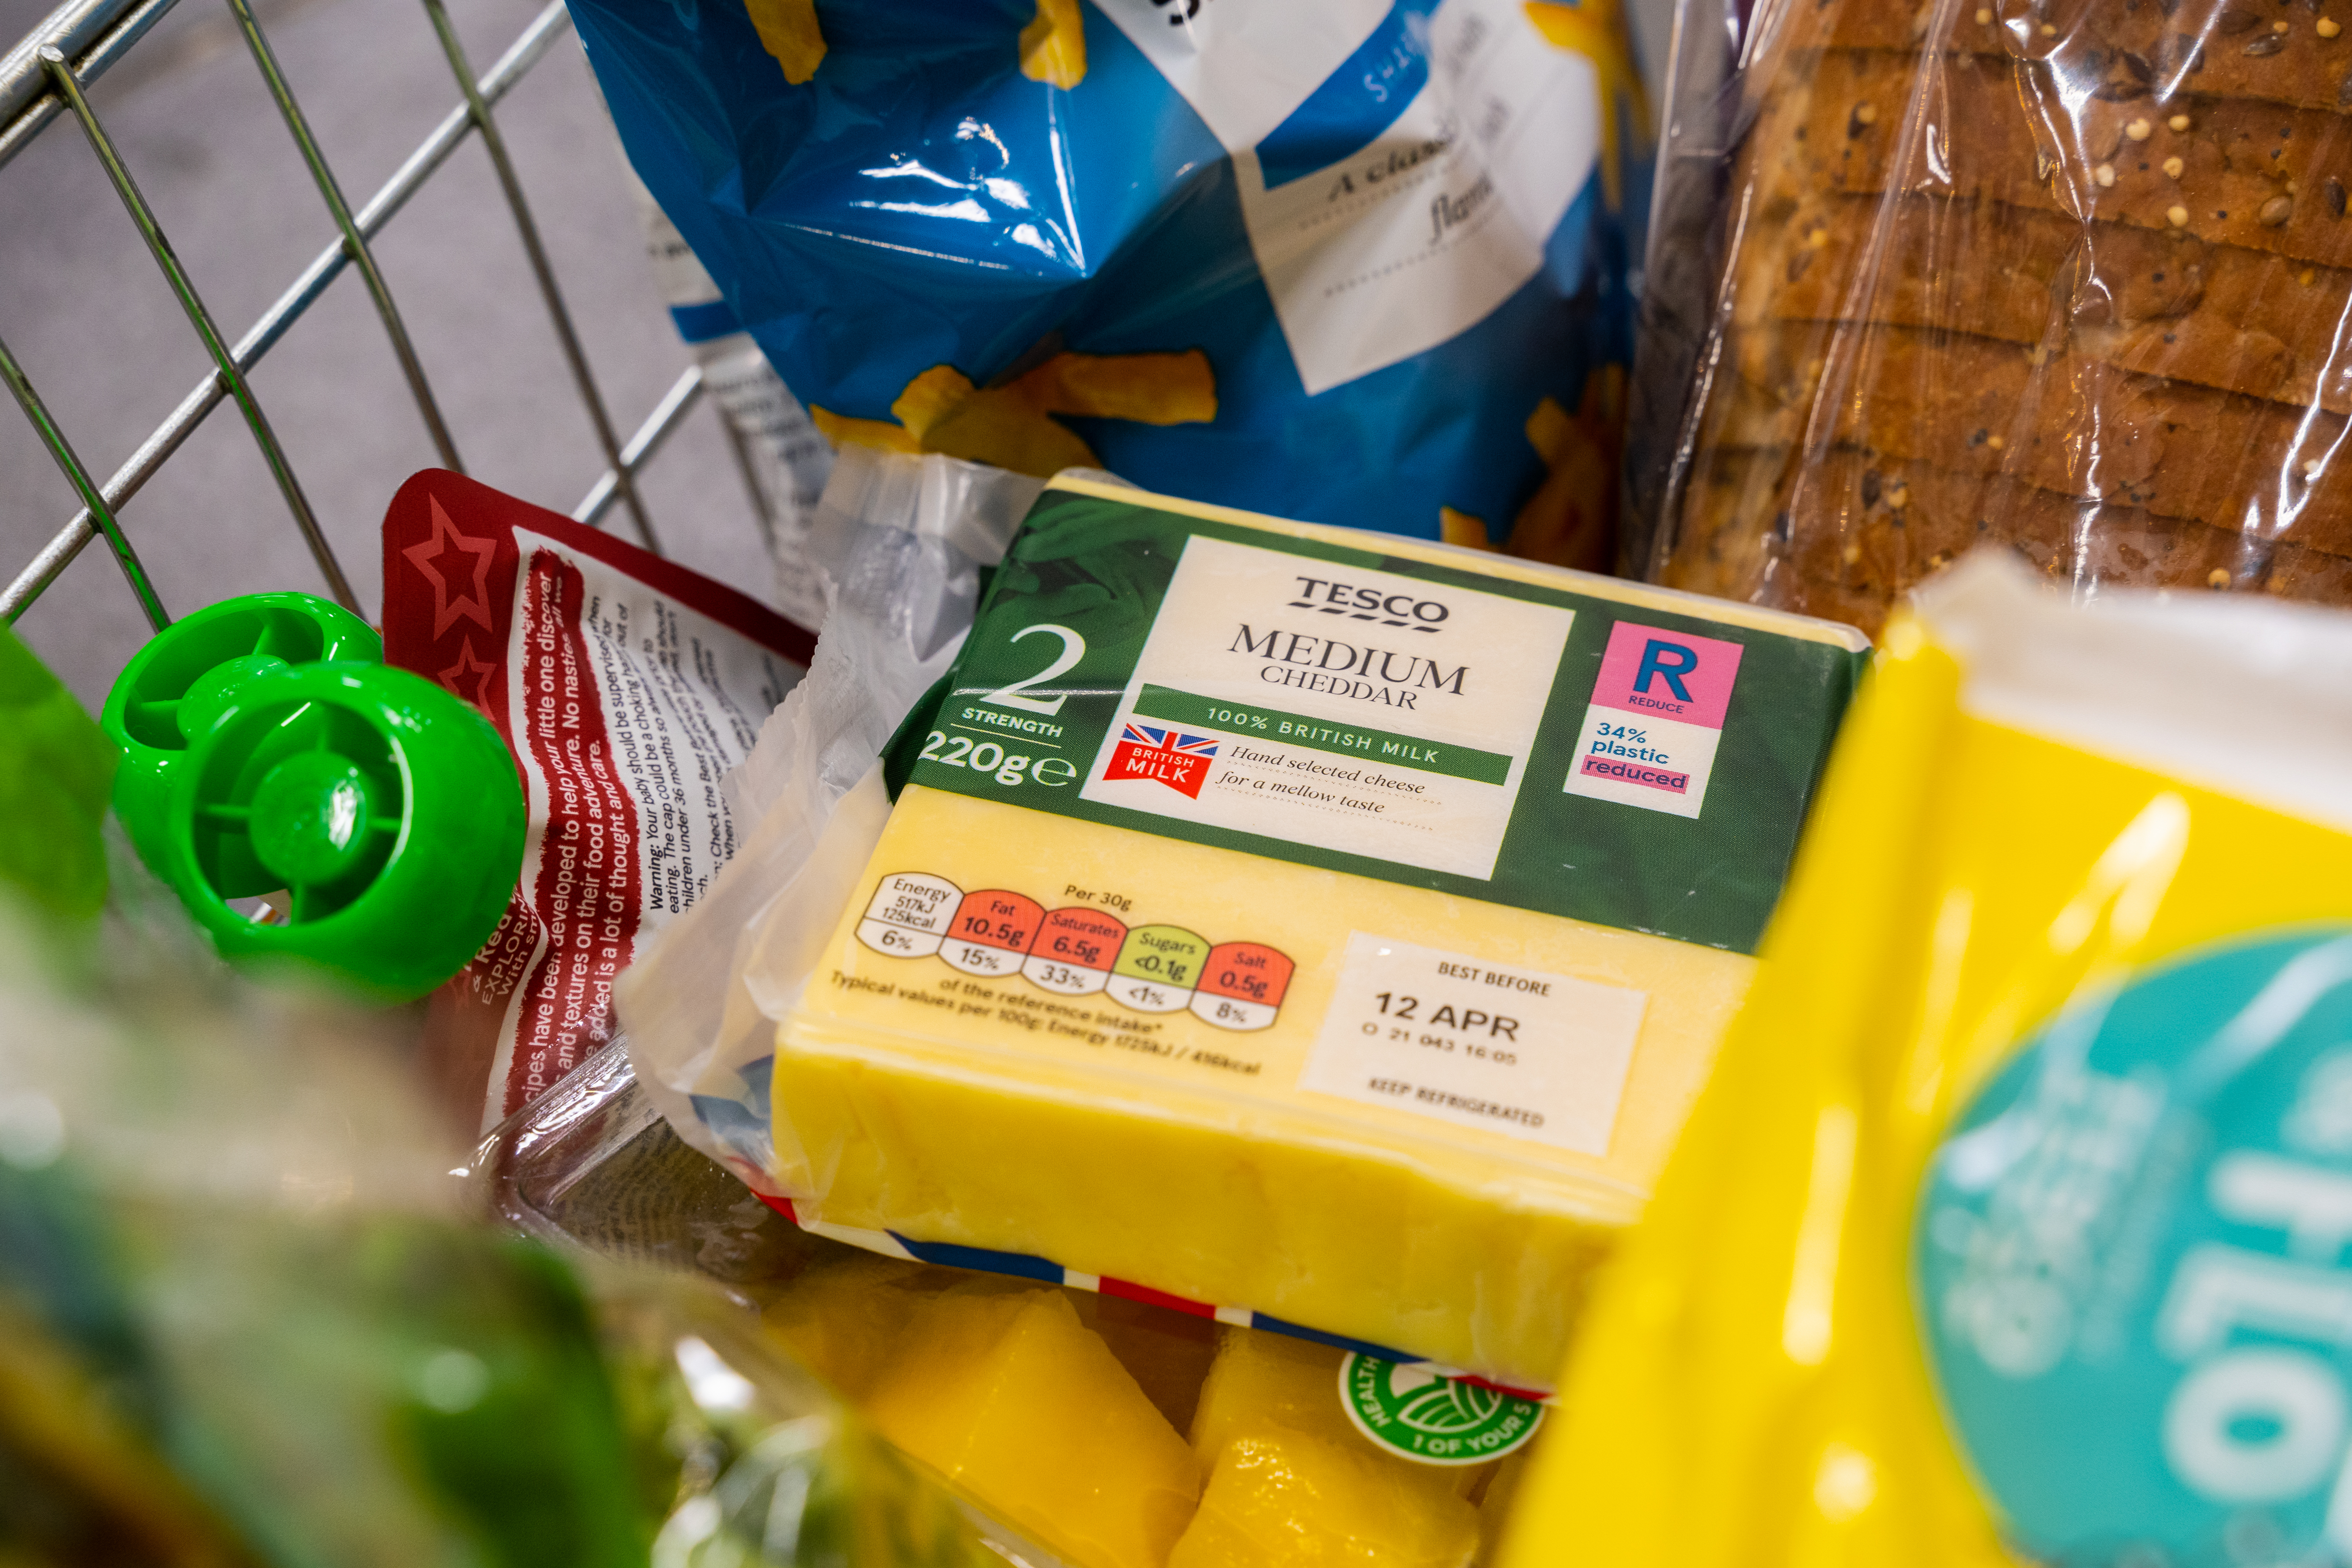 Tesco cheese in a shopping basket with a label showing packaging has been made from recycled plastic